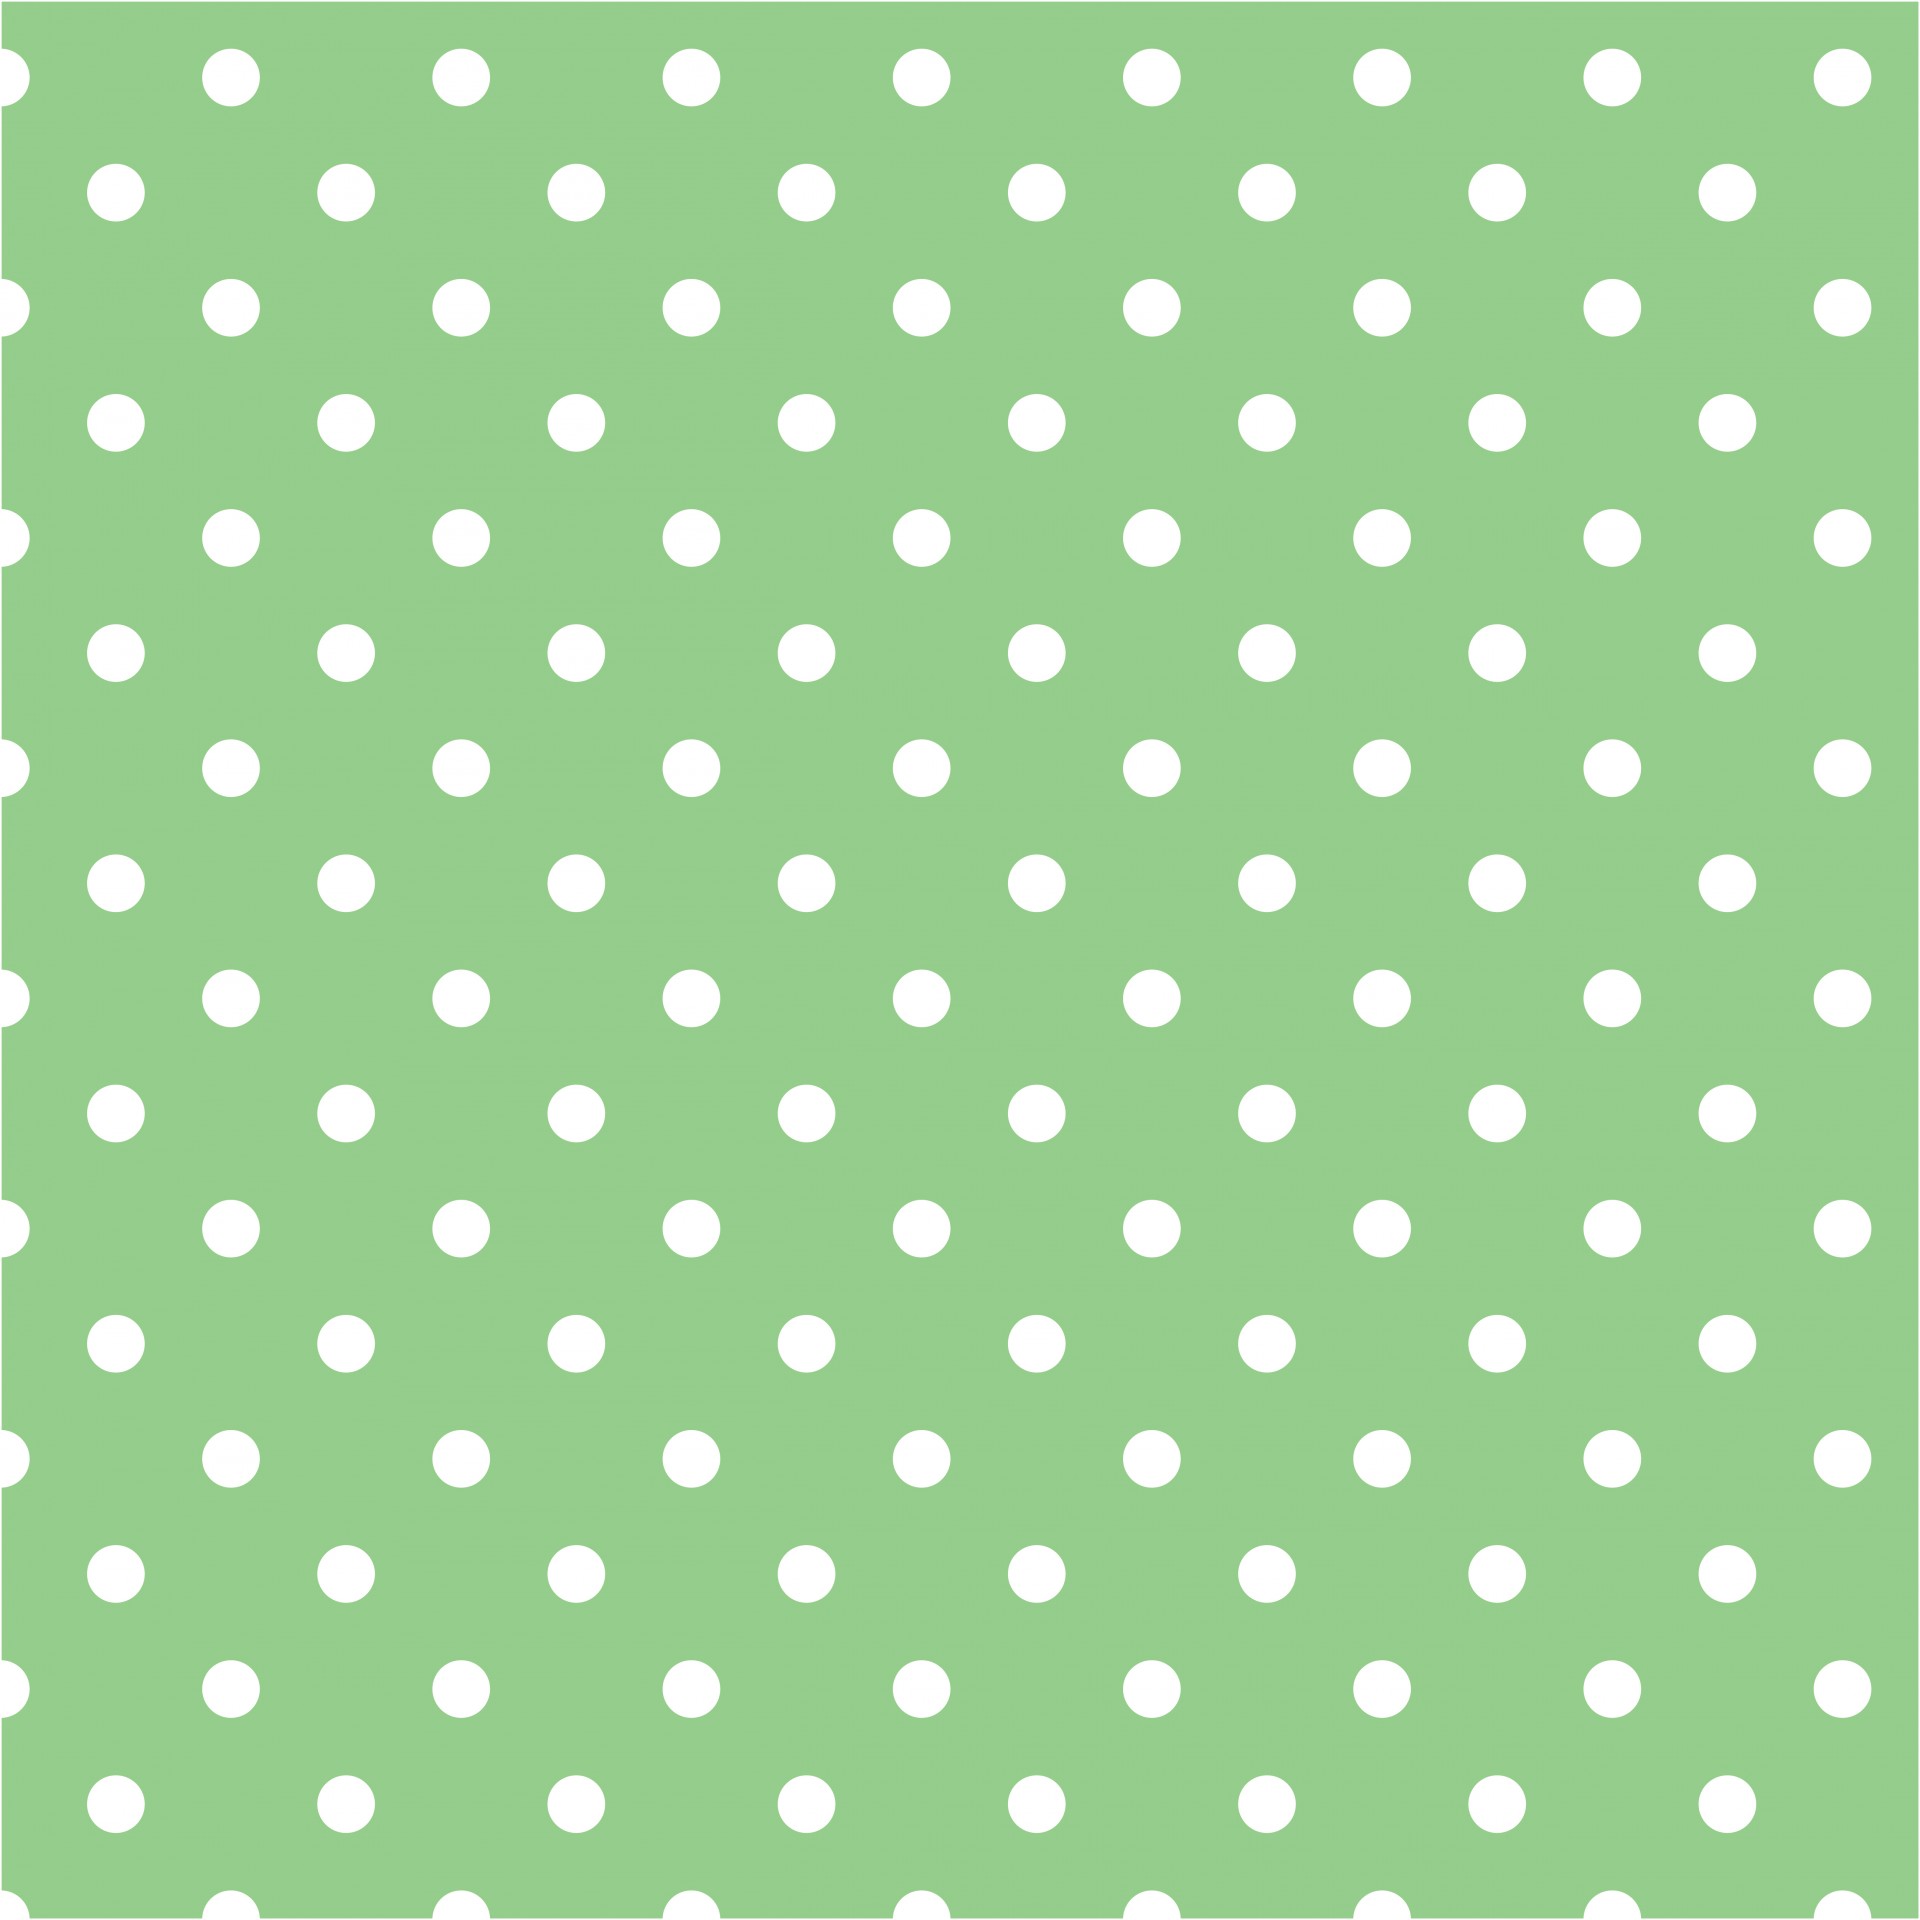 White polka dots on green background for scrapbooking